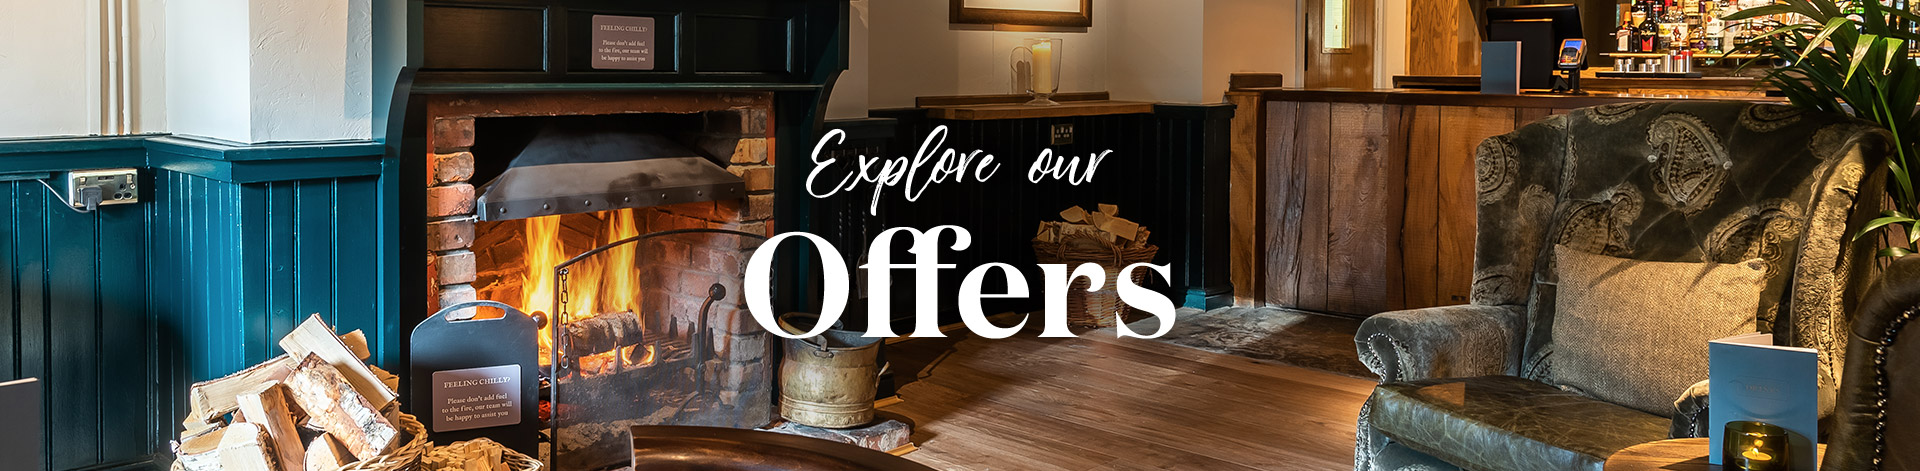 Our latest offers at The Castell Mynach